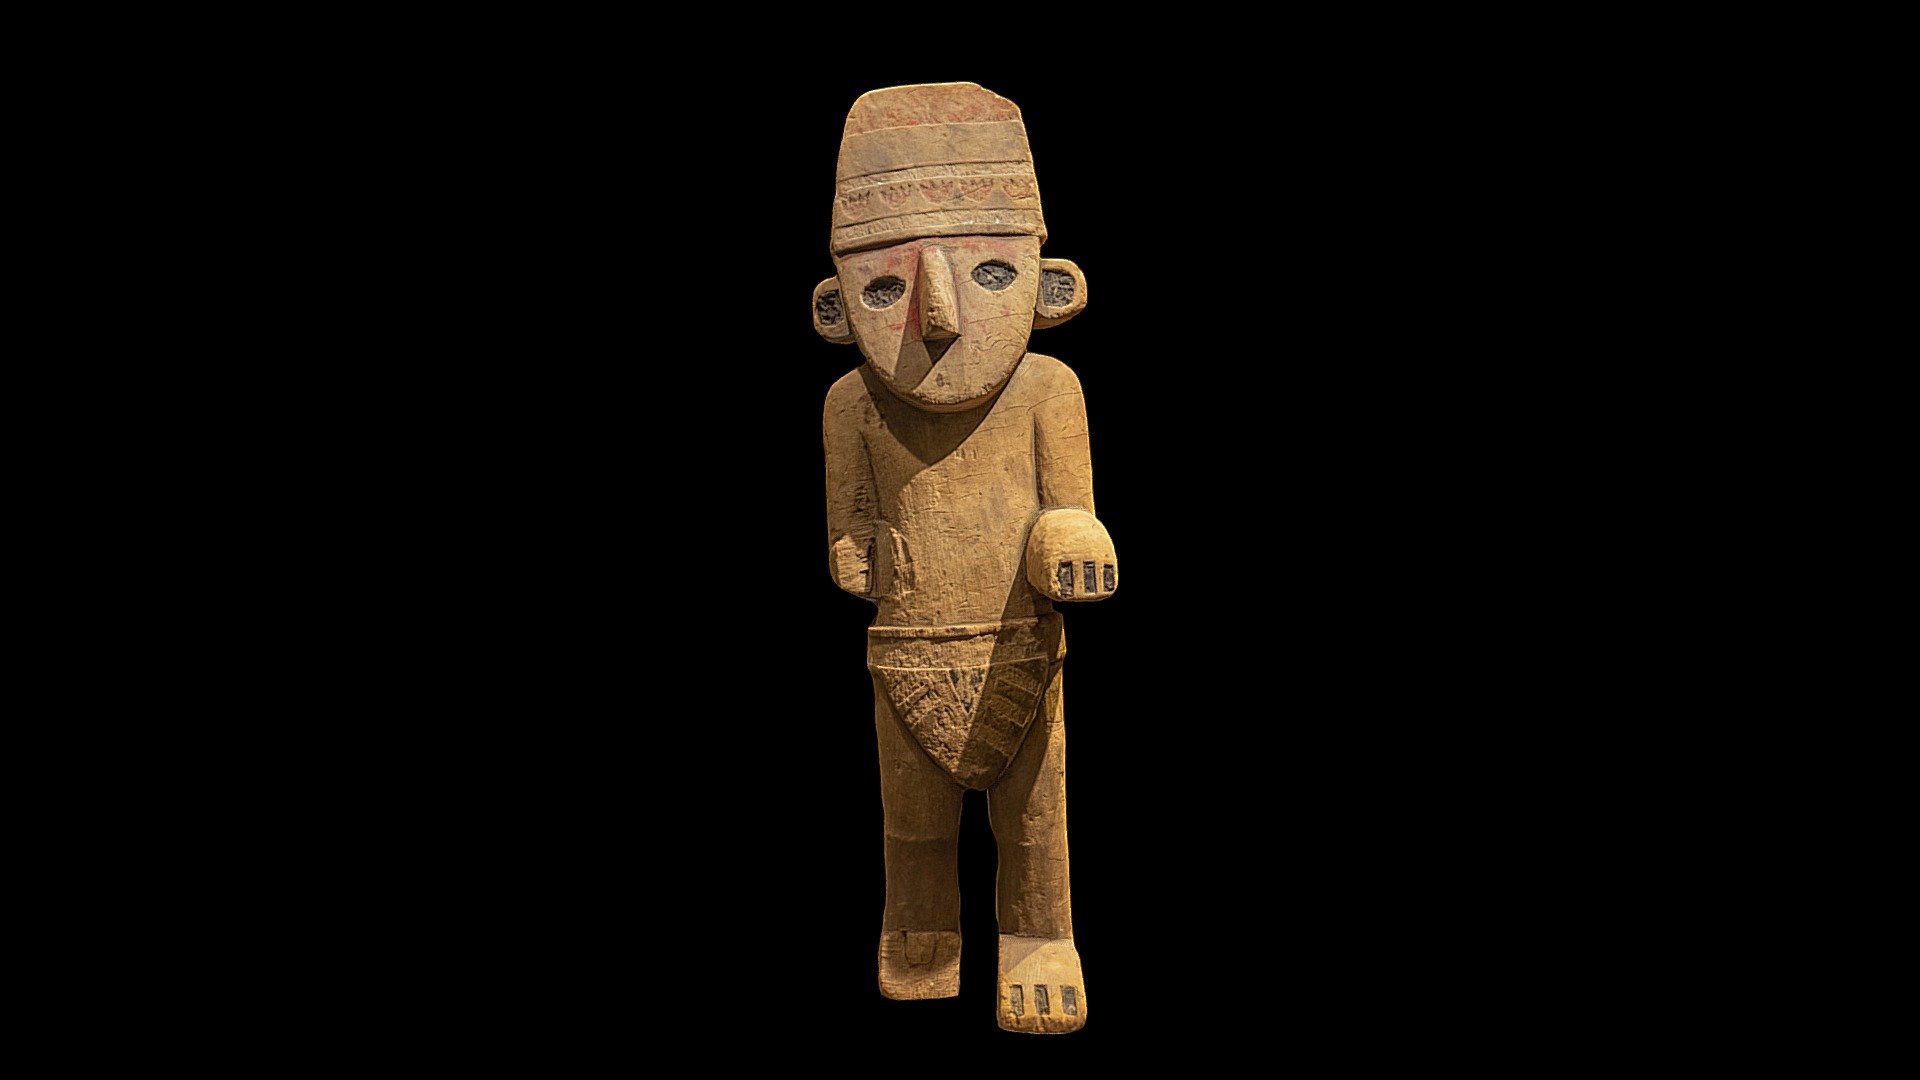 The Chimú statuette from the Cinquantenaire Museum which was copied by Hergé into The Broken Ear adventure of Tintin 3d model